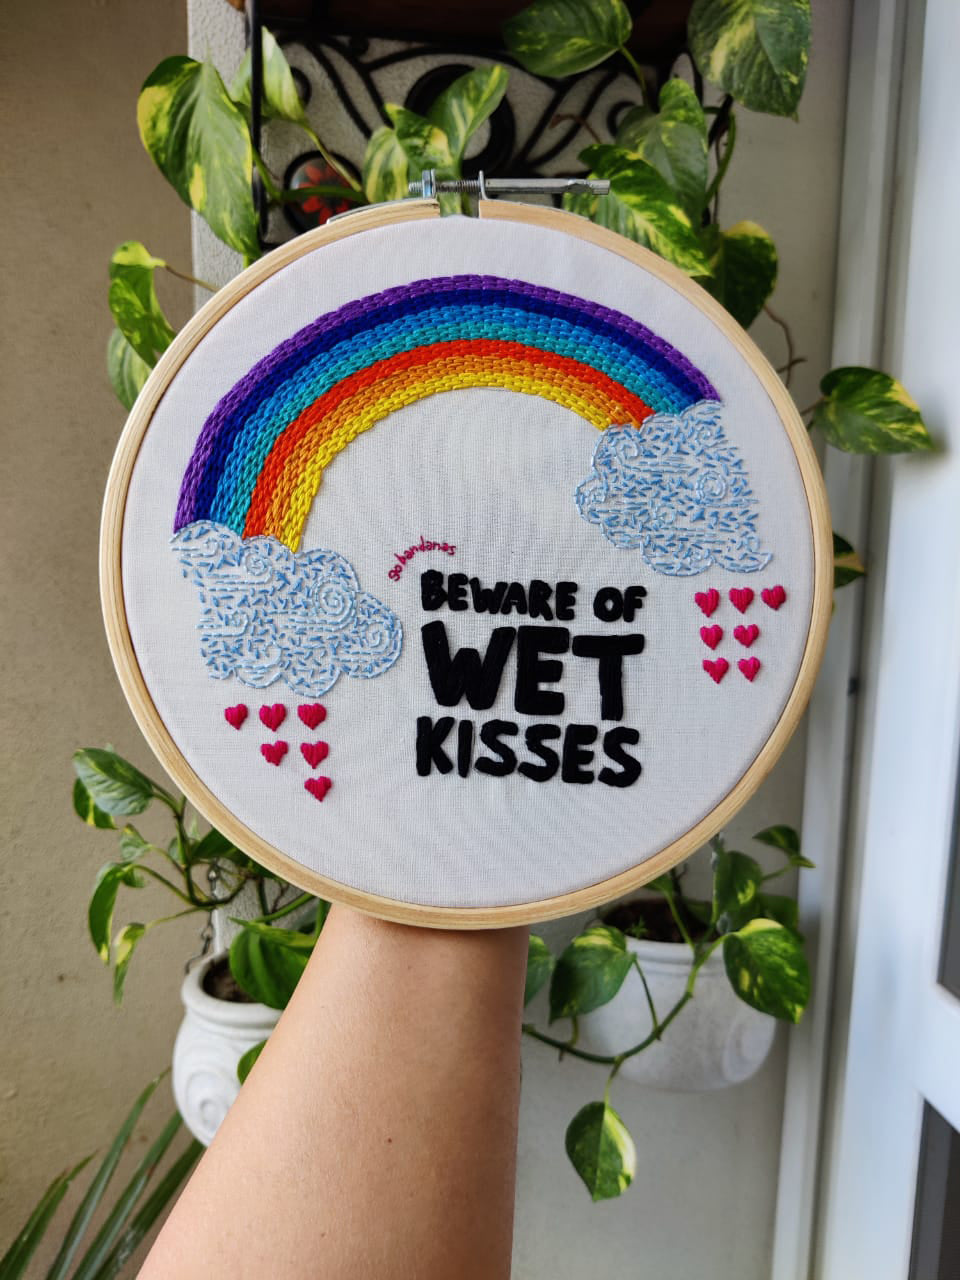 Go Bandanas Cute Rainbow Theme Beware of Wet Kisses Home Decoration Ornament Wall Hoop Hanging Handmade Embroidery Ring Frame for Pet Dog Cat Parents (10")